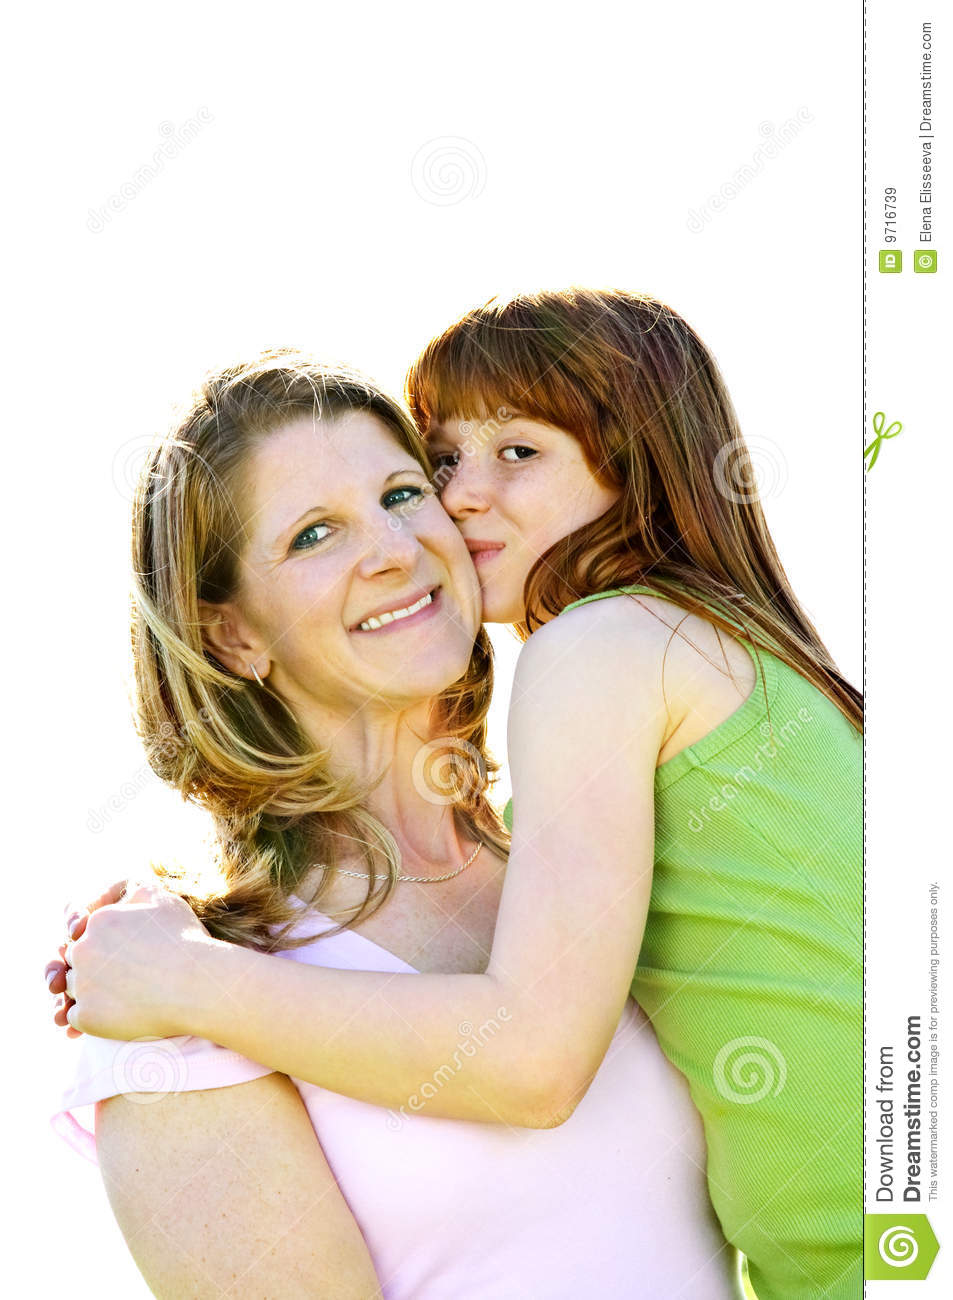 Mother And Daughter Hugging Royalty Free Stock Images   Image  9716739